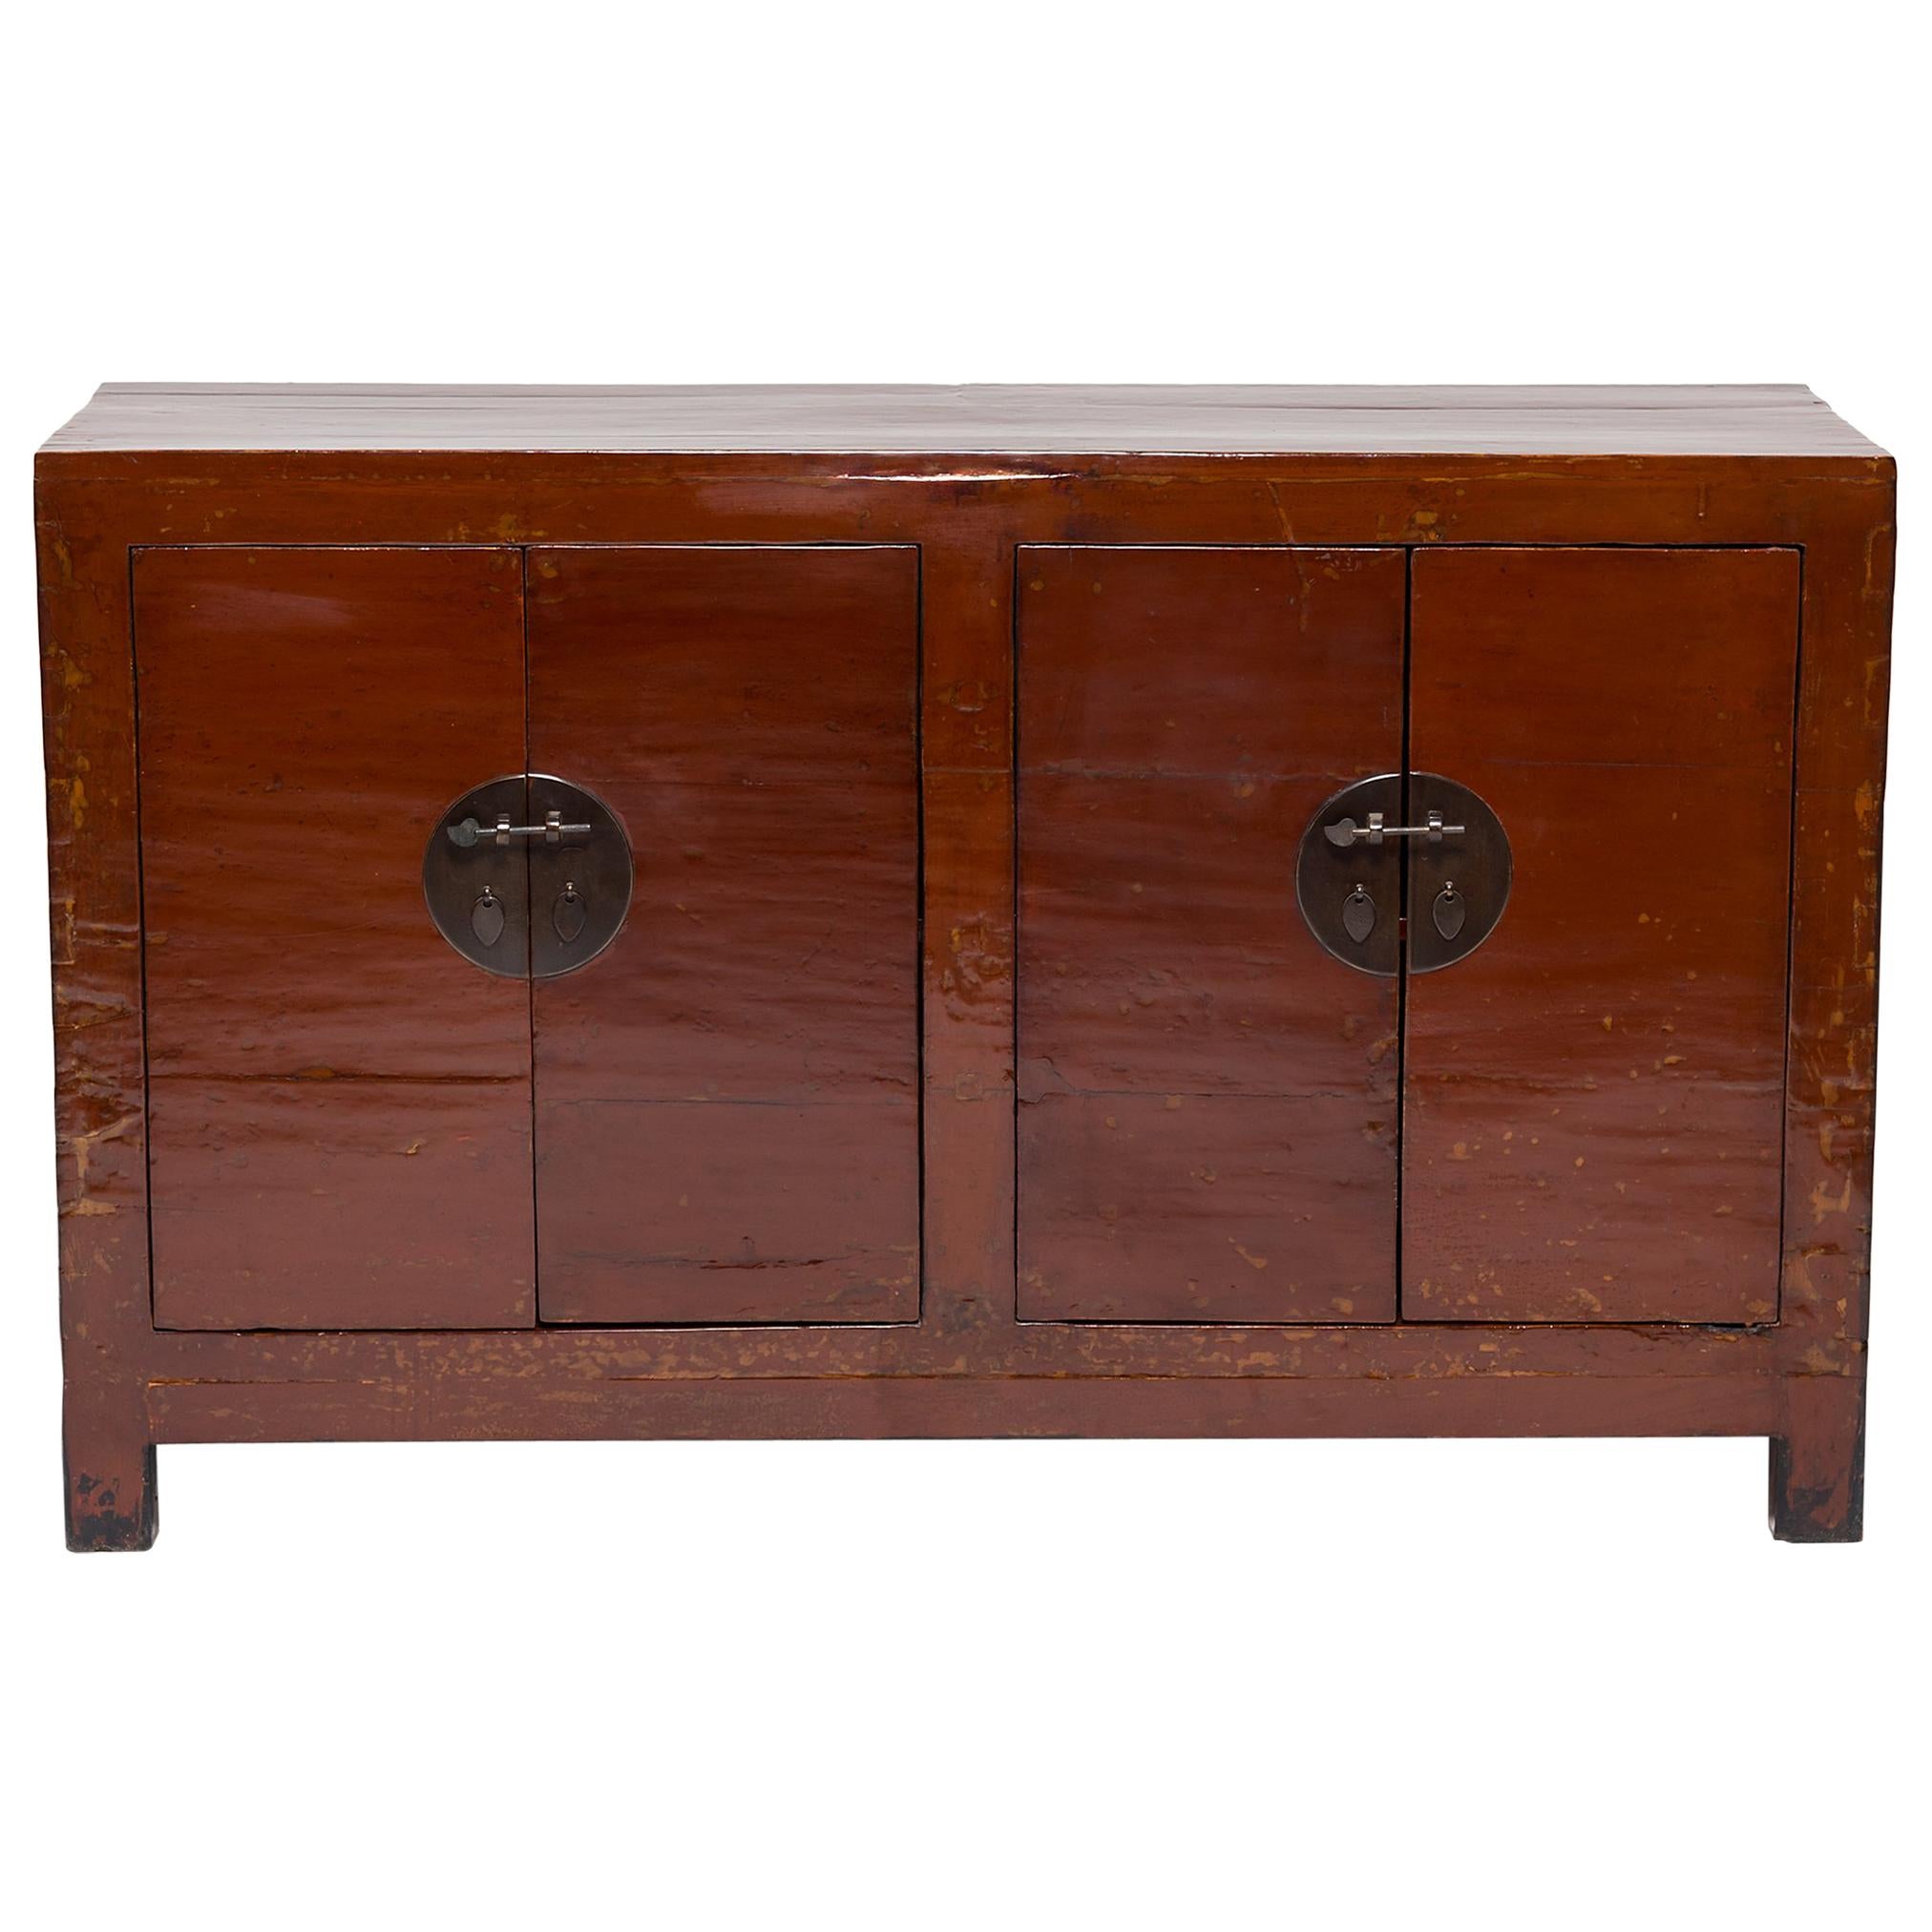 Late 19th Century Chinese Red Lacquer Sideboard